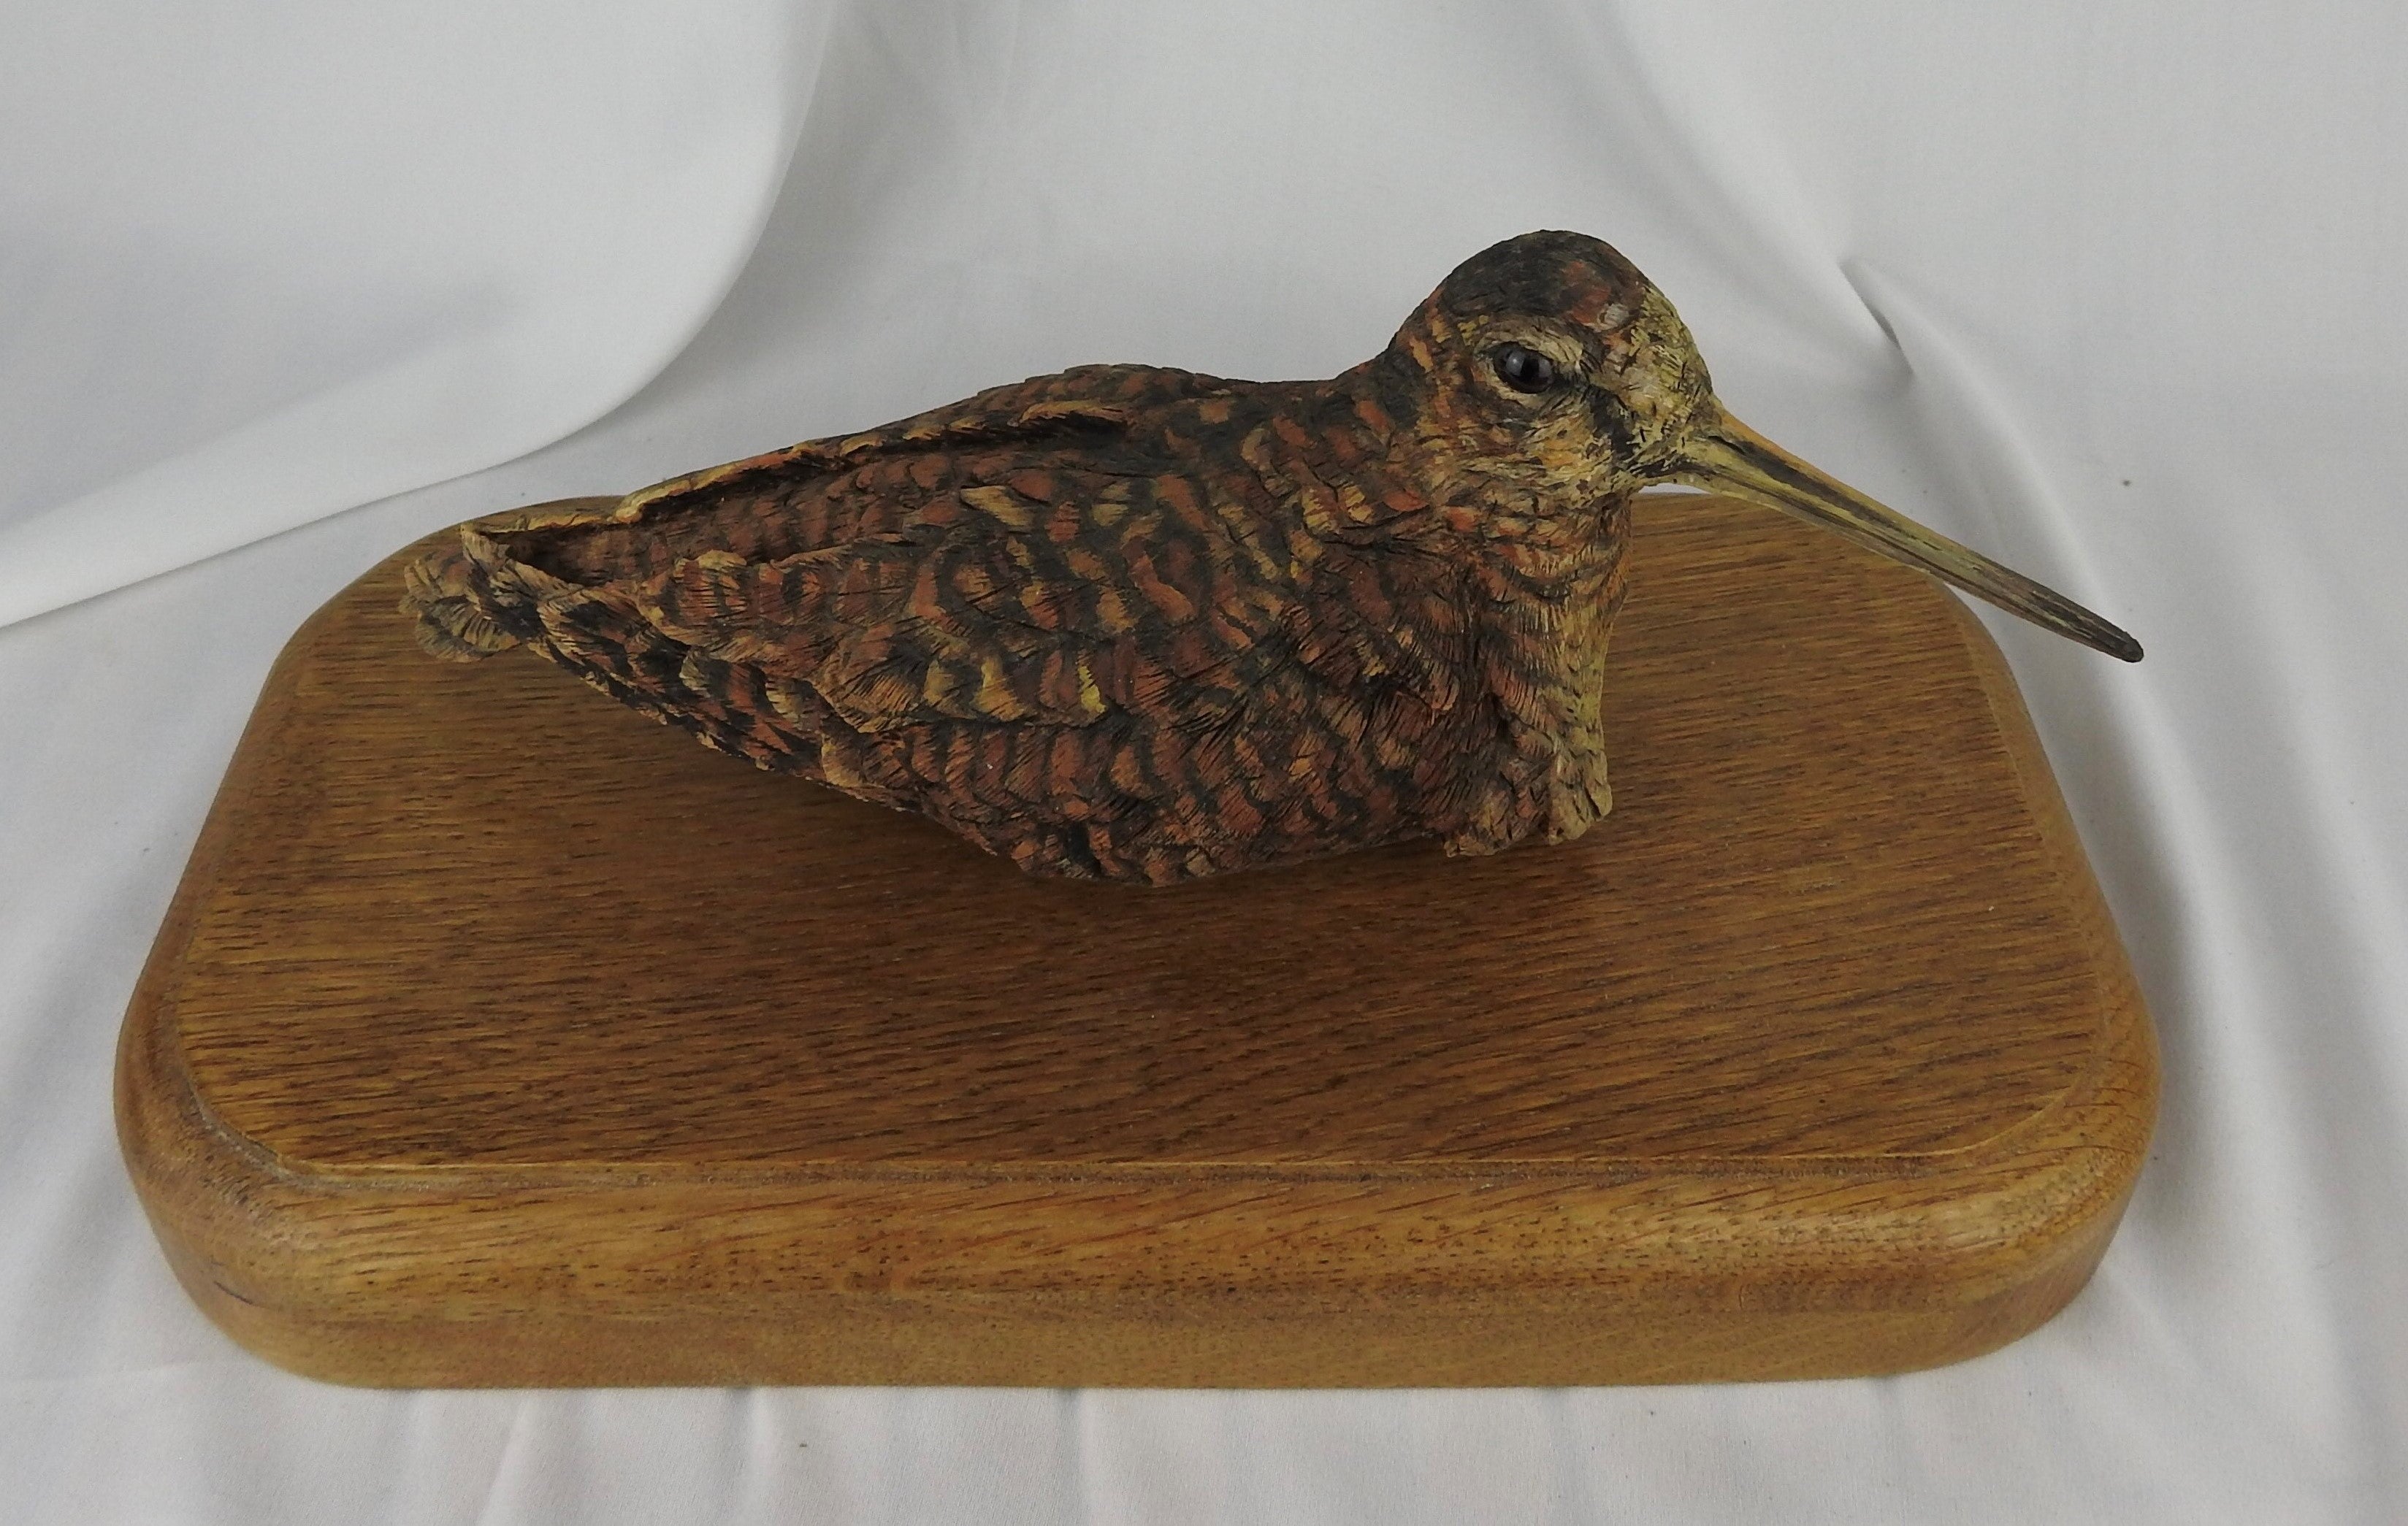 'Lying Woodcock' Wooden Sculpture by Martyn Bednarczuk